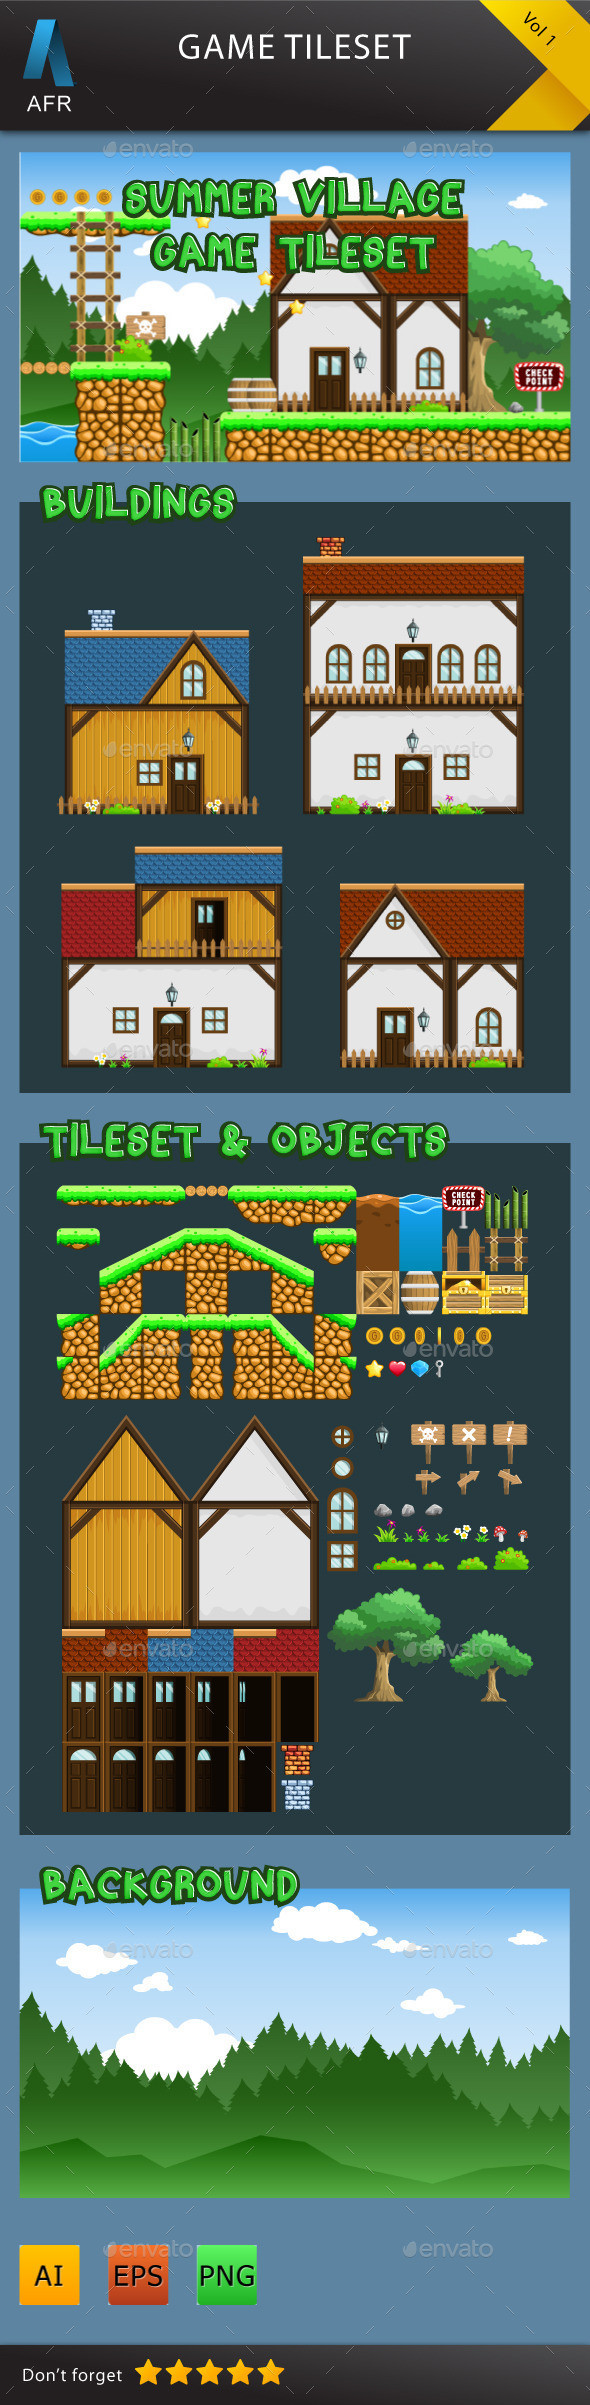 Afr 20game 20tilesets 20vol 201 20 preview  01